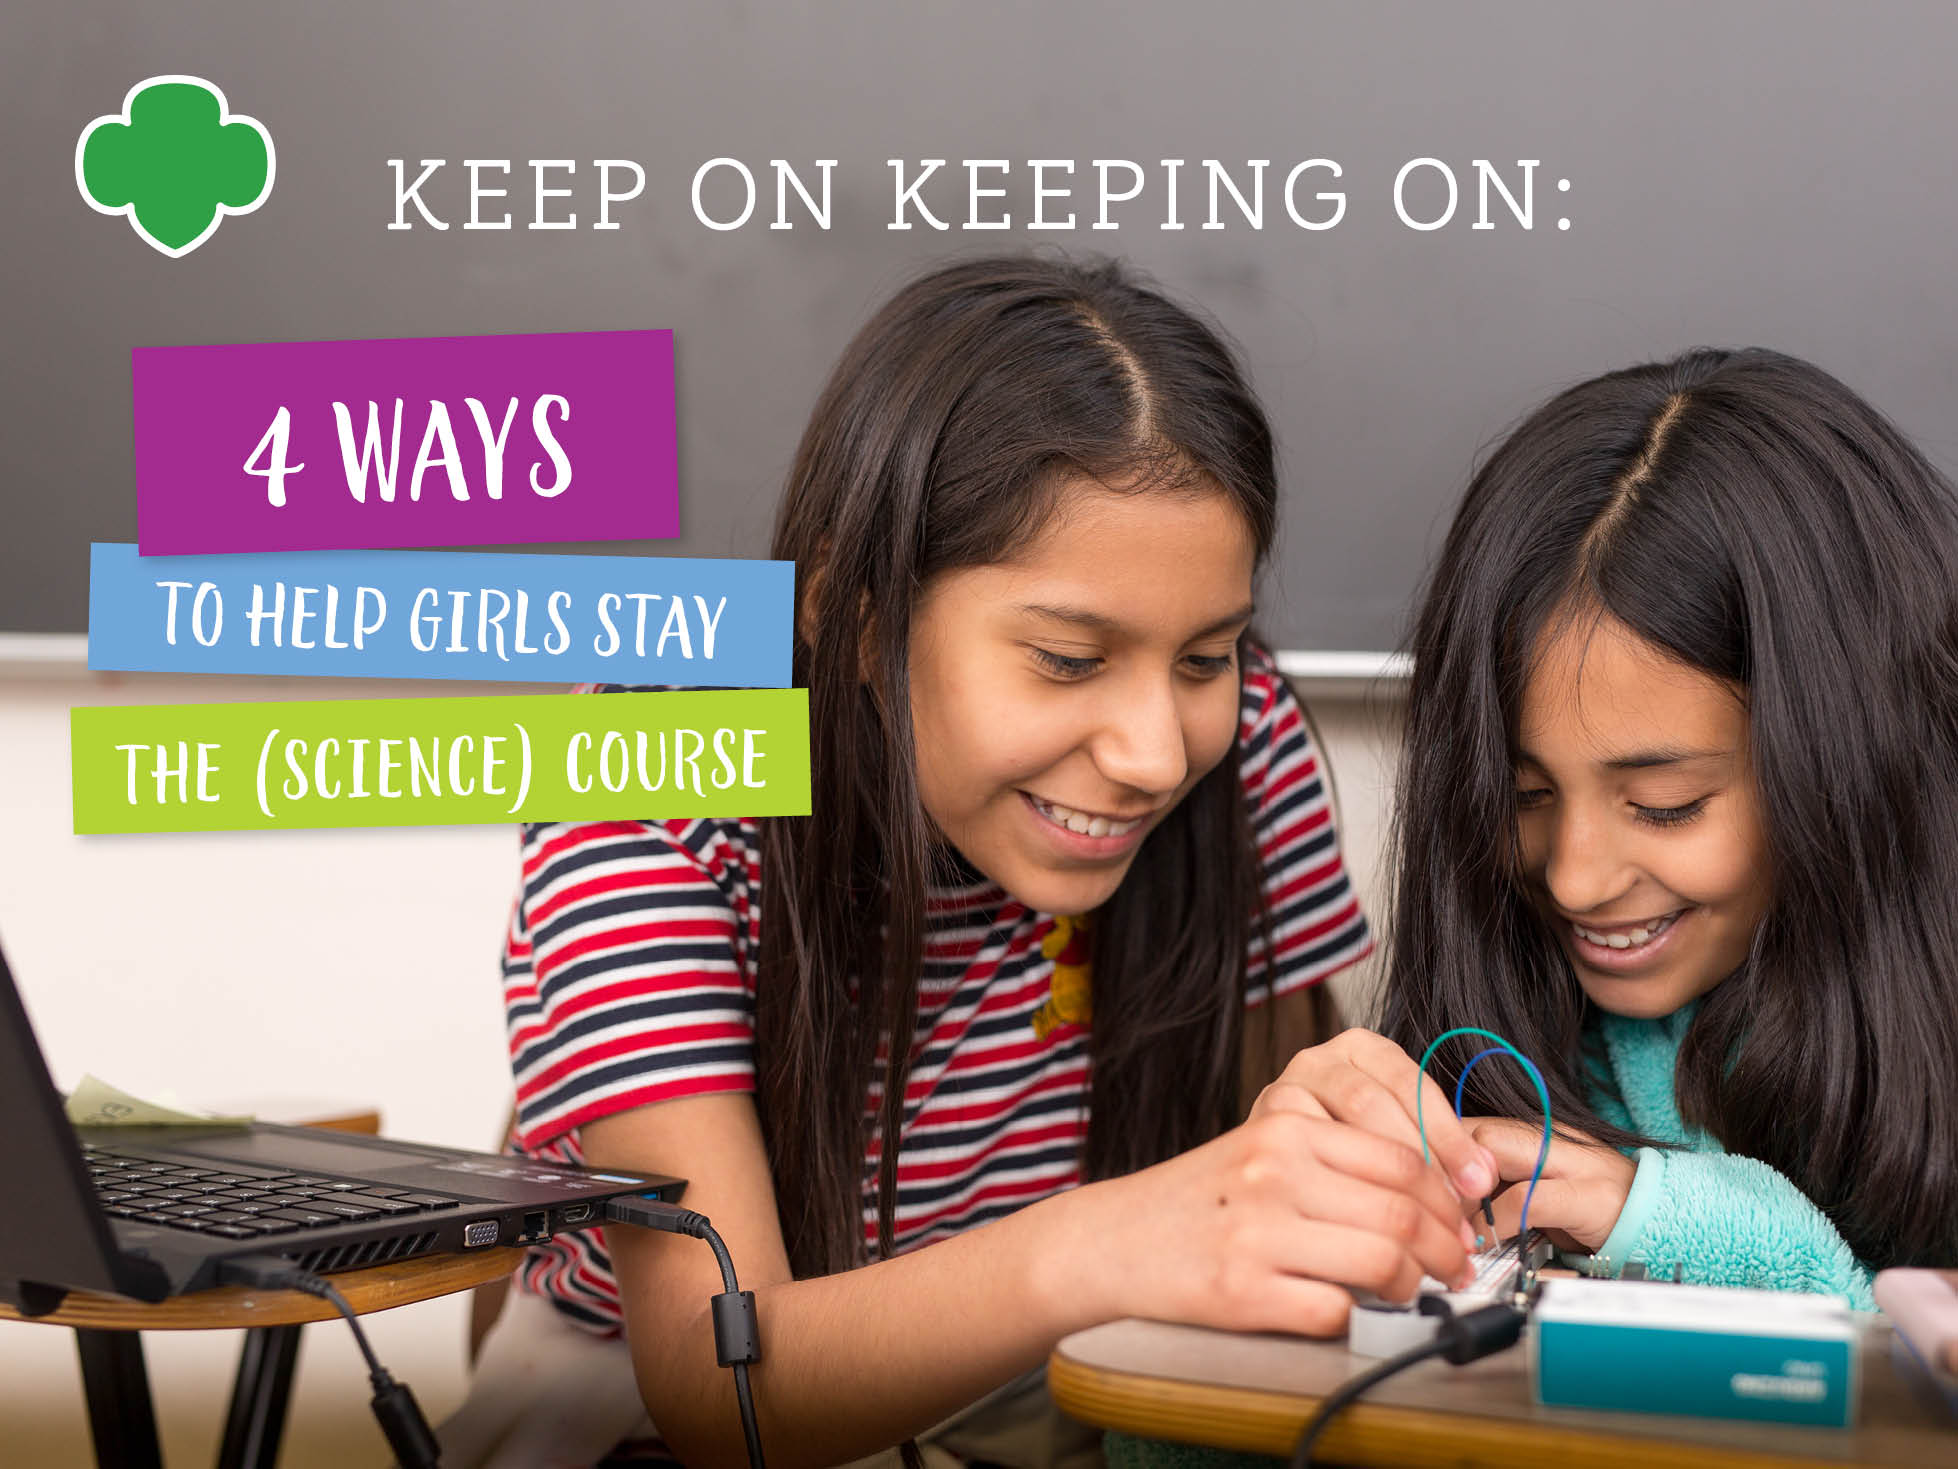 Keep on Keeping On: 4 Ways to Help Girls Stay the Science Course